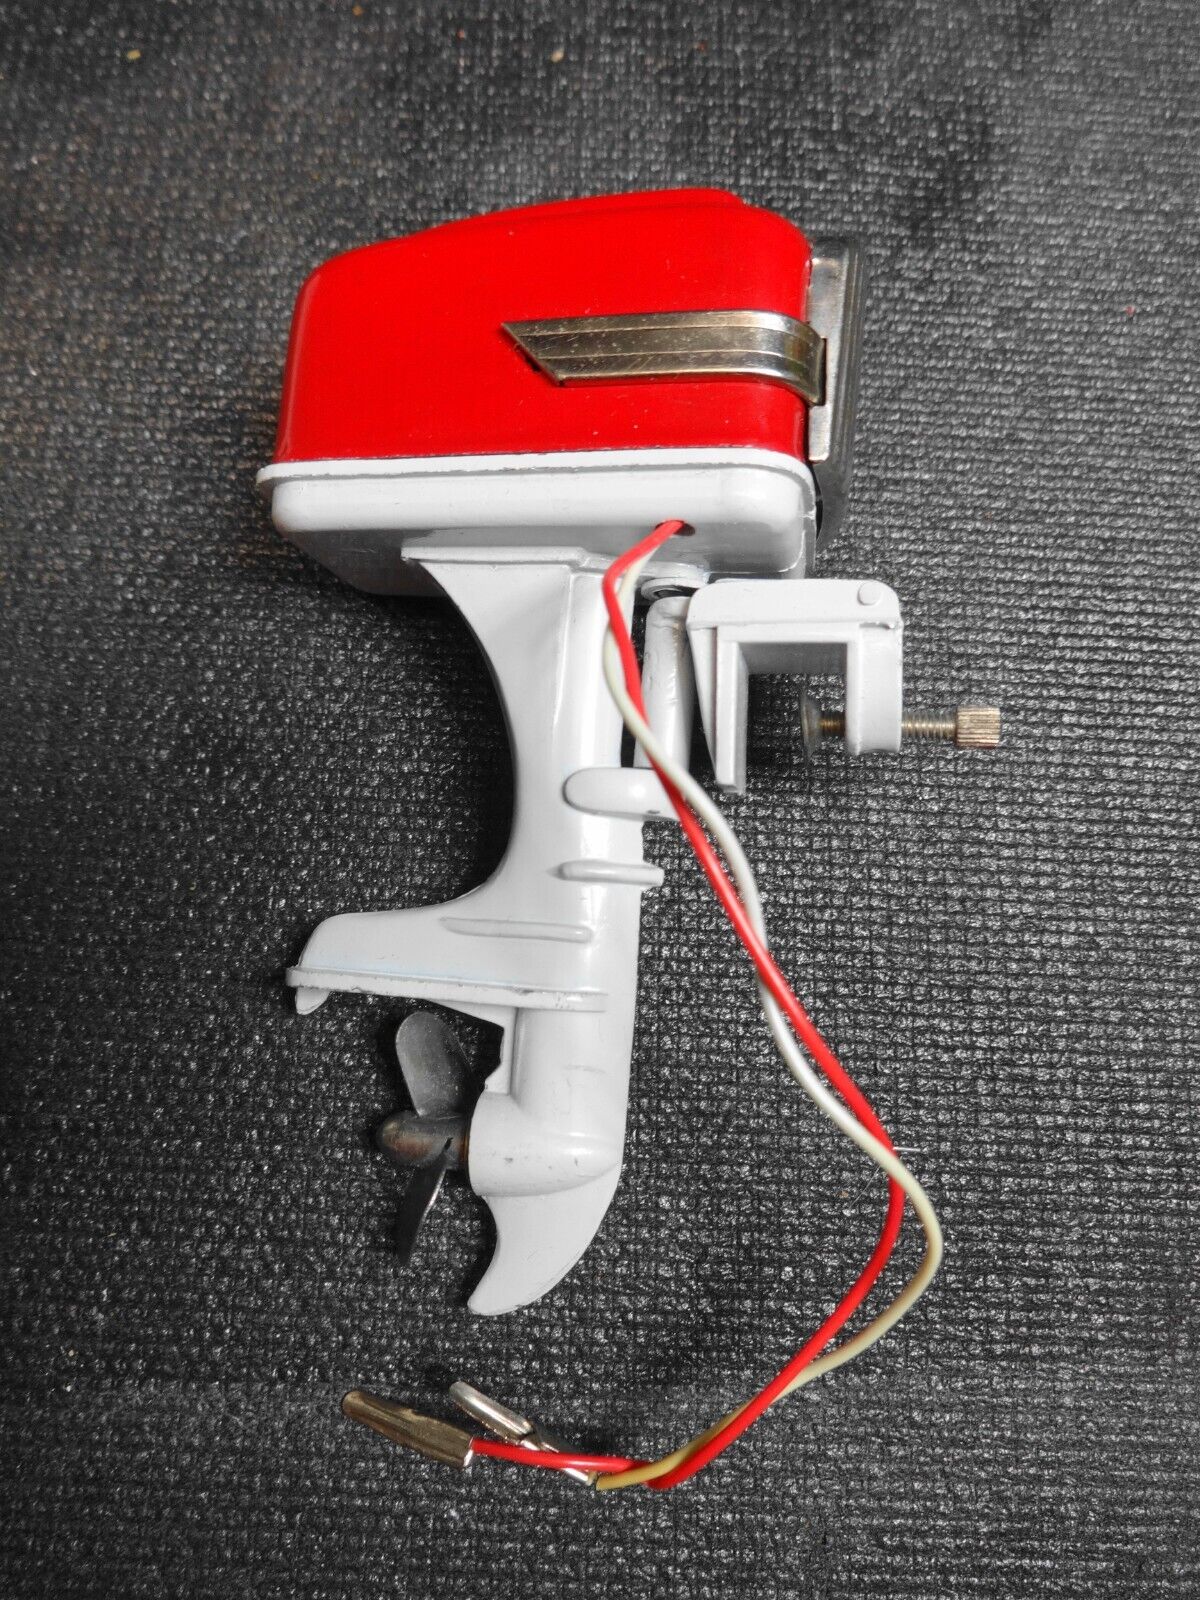 OLSON M0-34 TOY ELECTRIC MINIATURE OUTBOARD MOTOR